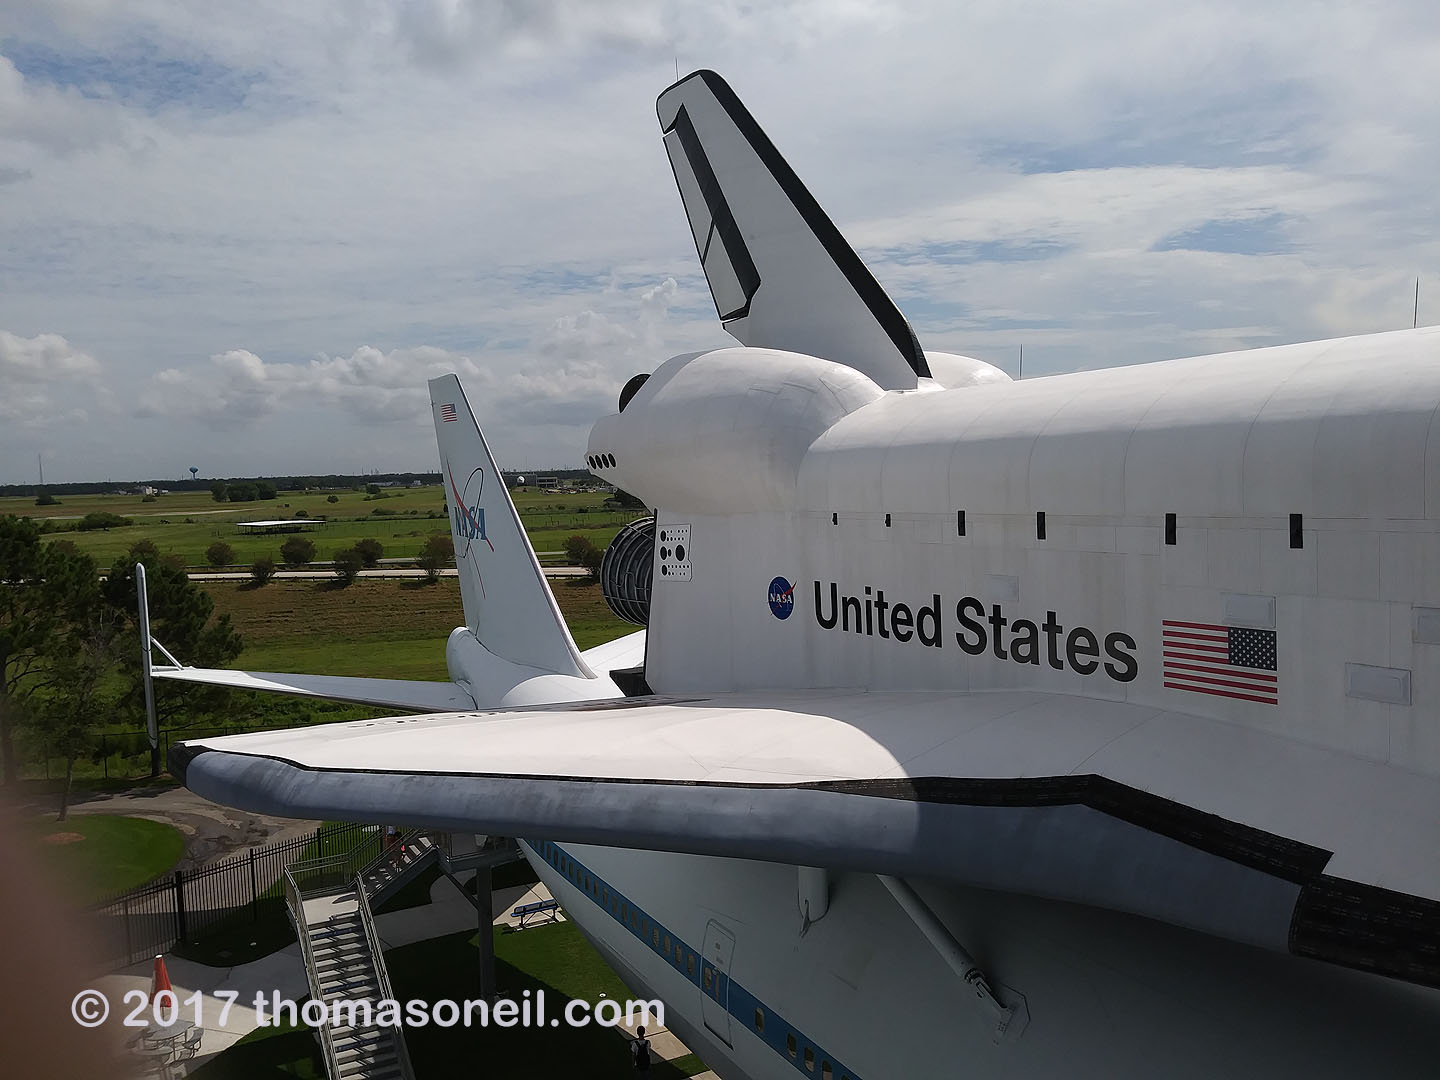 Space Shuttle Independence mounted on 747, Johnson Space Center, Houston.  The shuttle is a replica but the 747 is one of those used in the program.  Click for next photo.